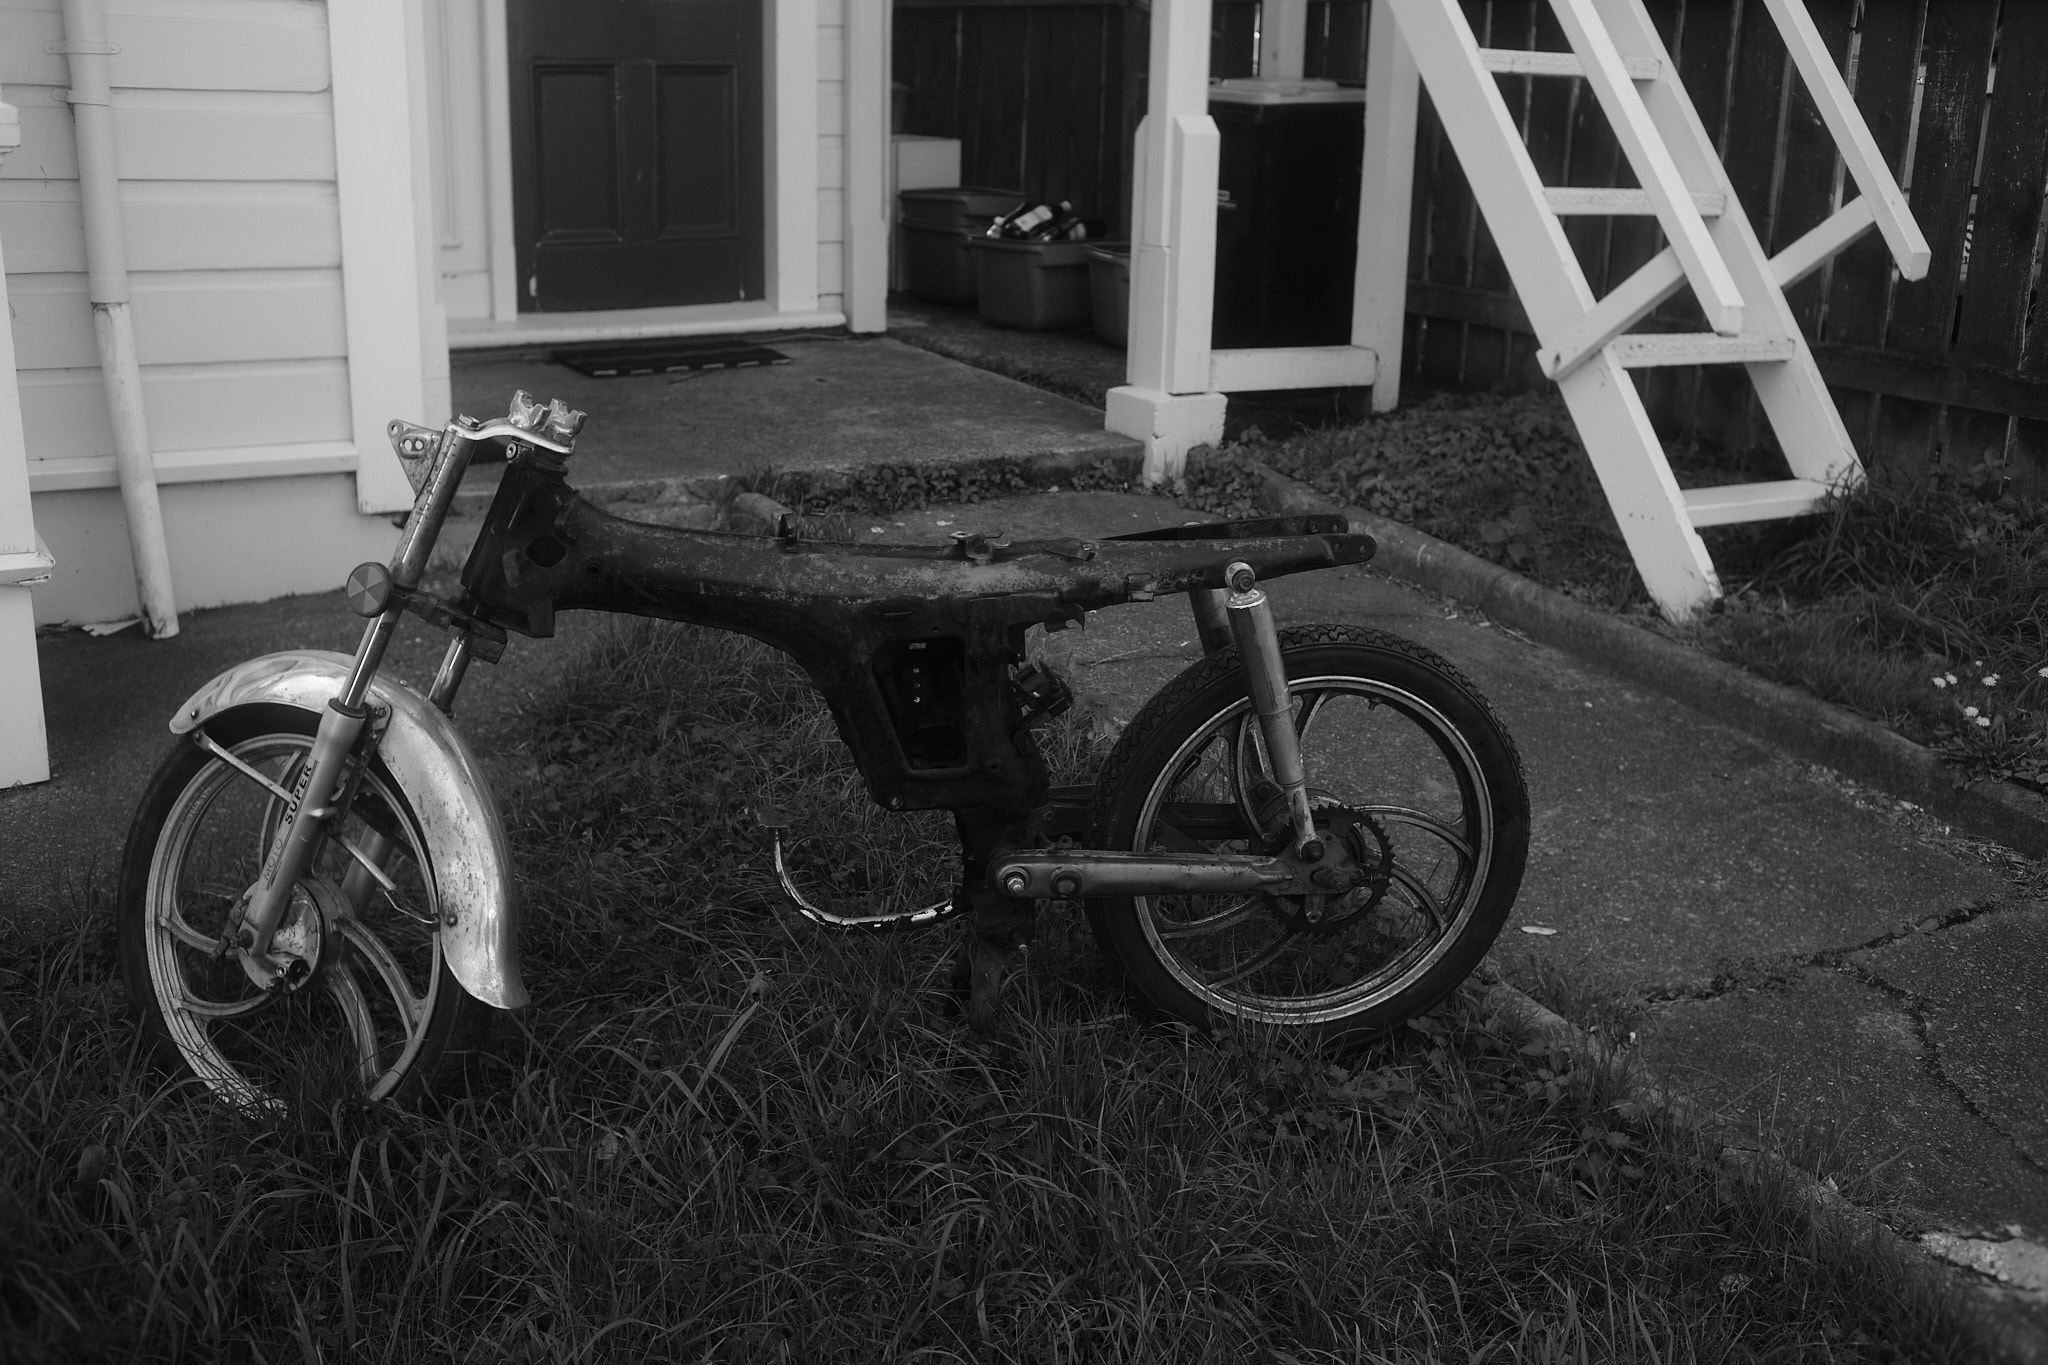 An empty frame of a motorbike sits in the front of someones yard.